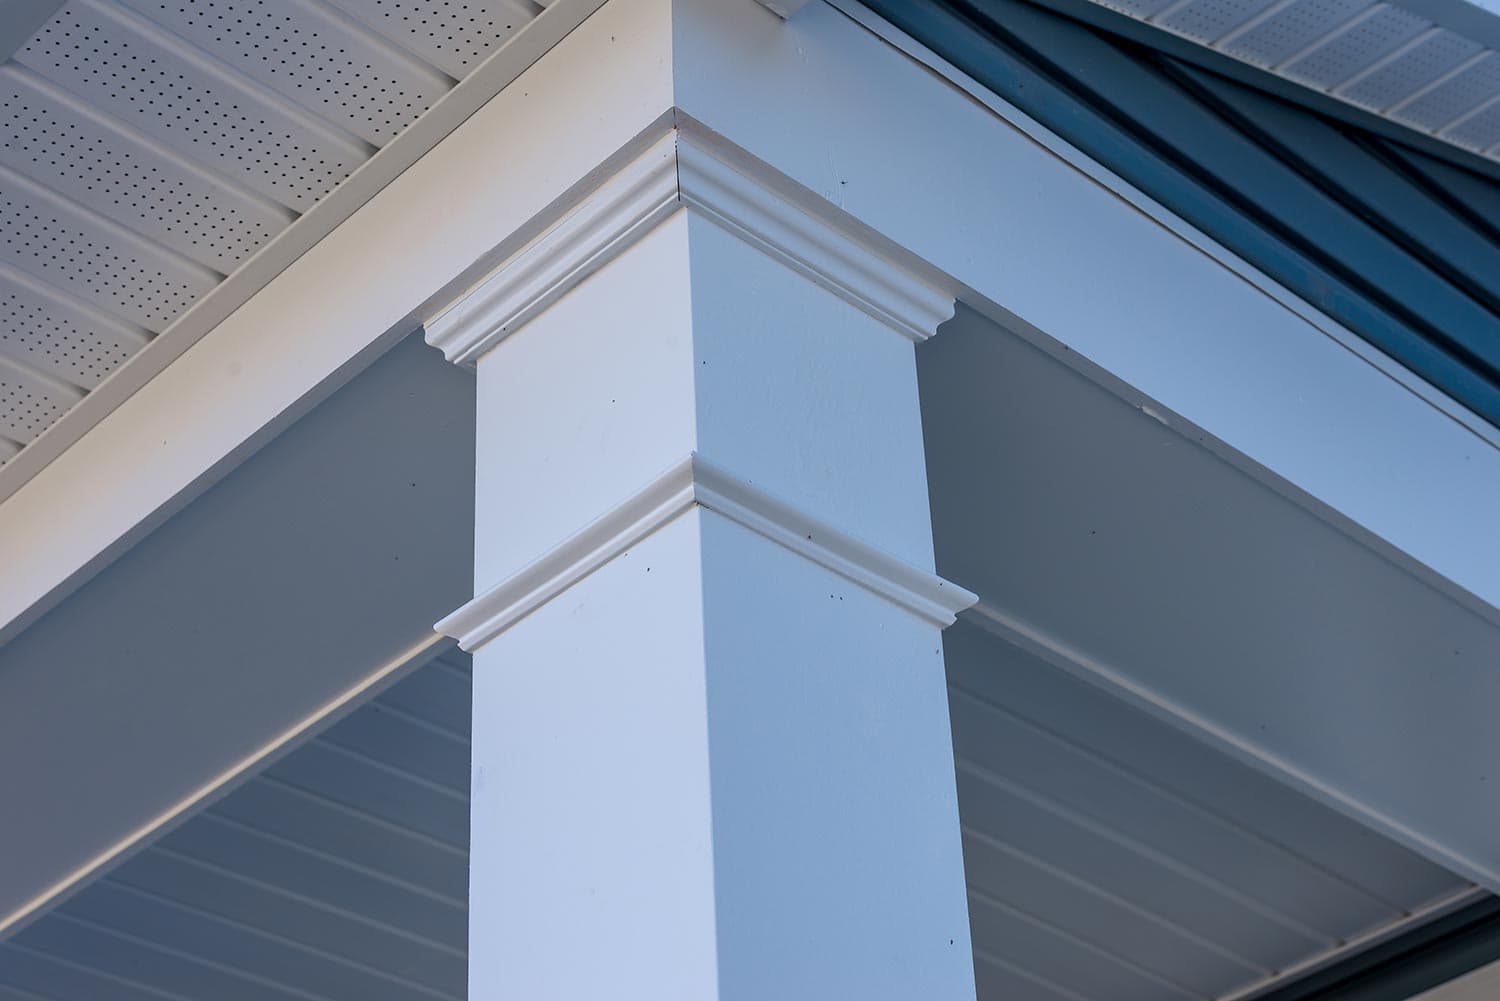 Colonial white custom porch columns with wood looking vinyl column wrap, sheets and molding, white soffit provides optimal ventilation for roof overhangs